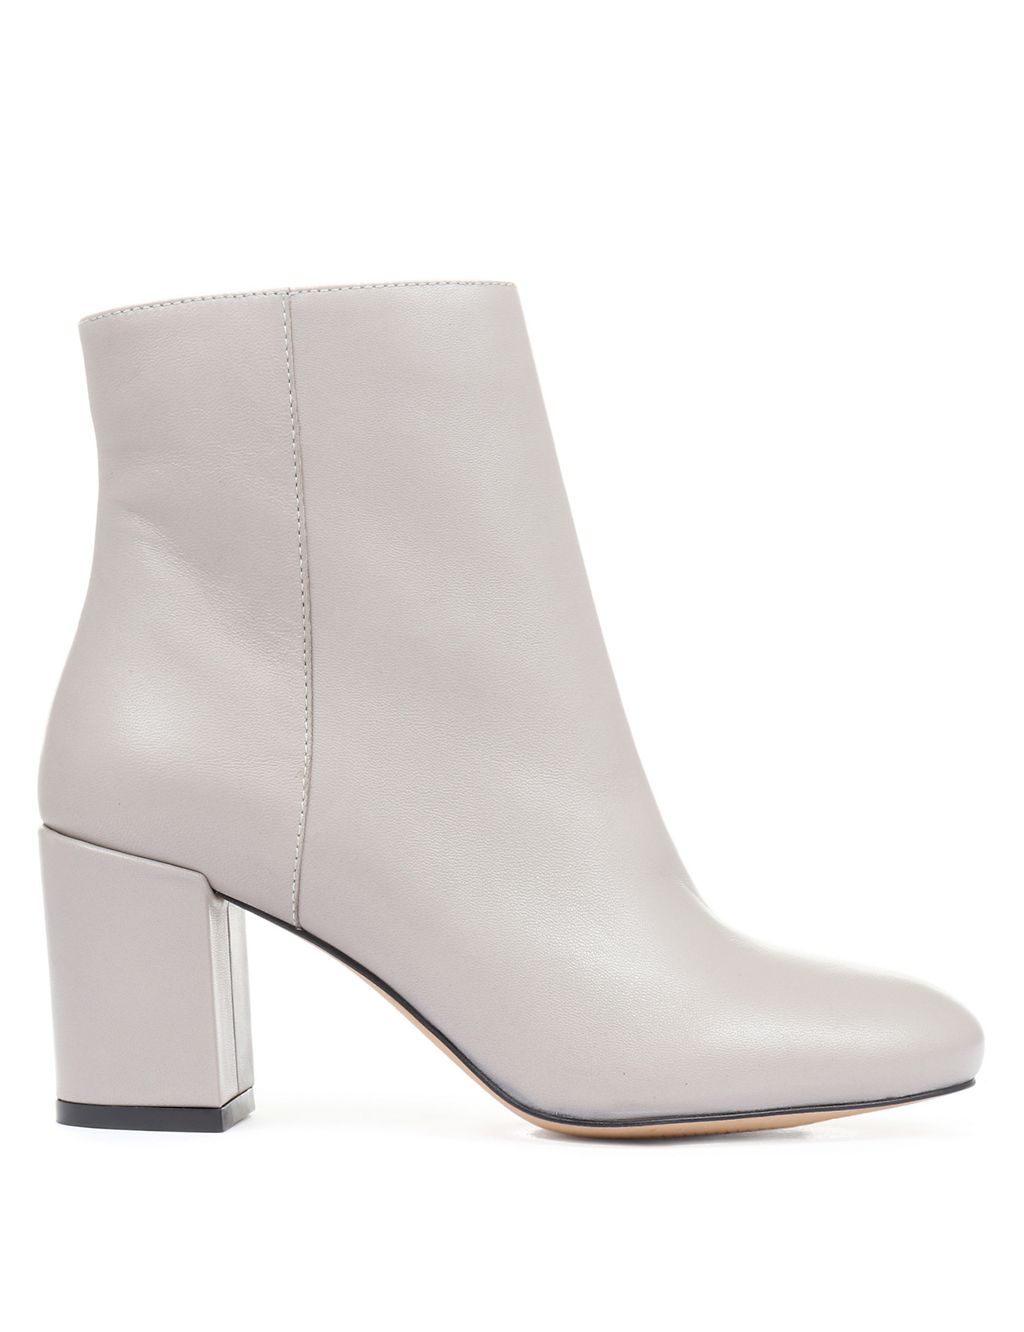 Leather Block Heel Ankle Boots 4 of 5